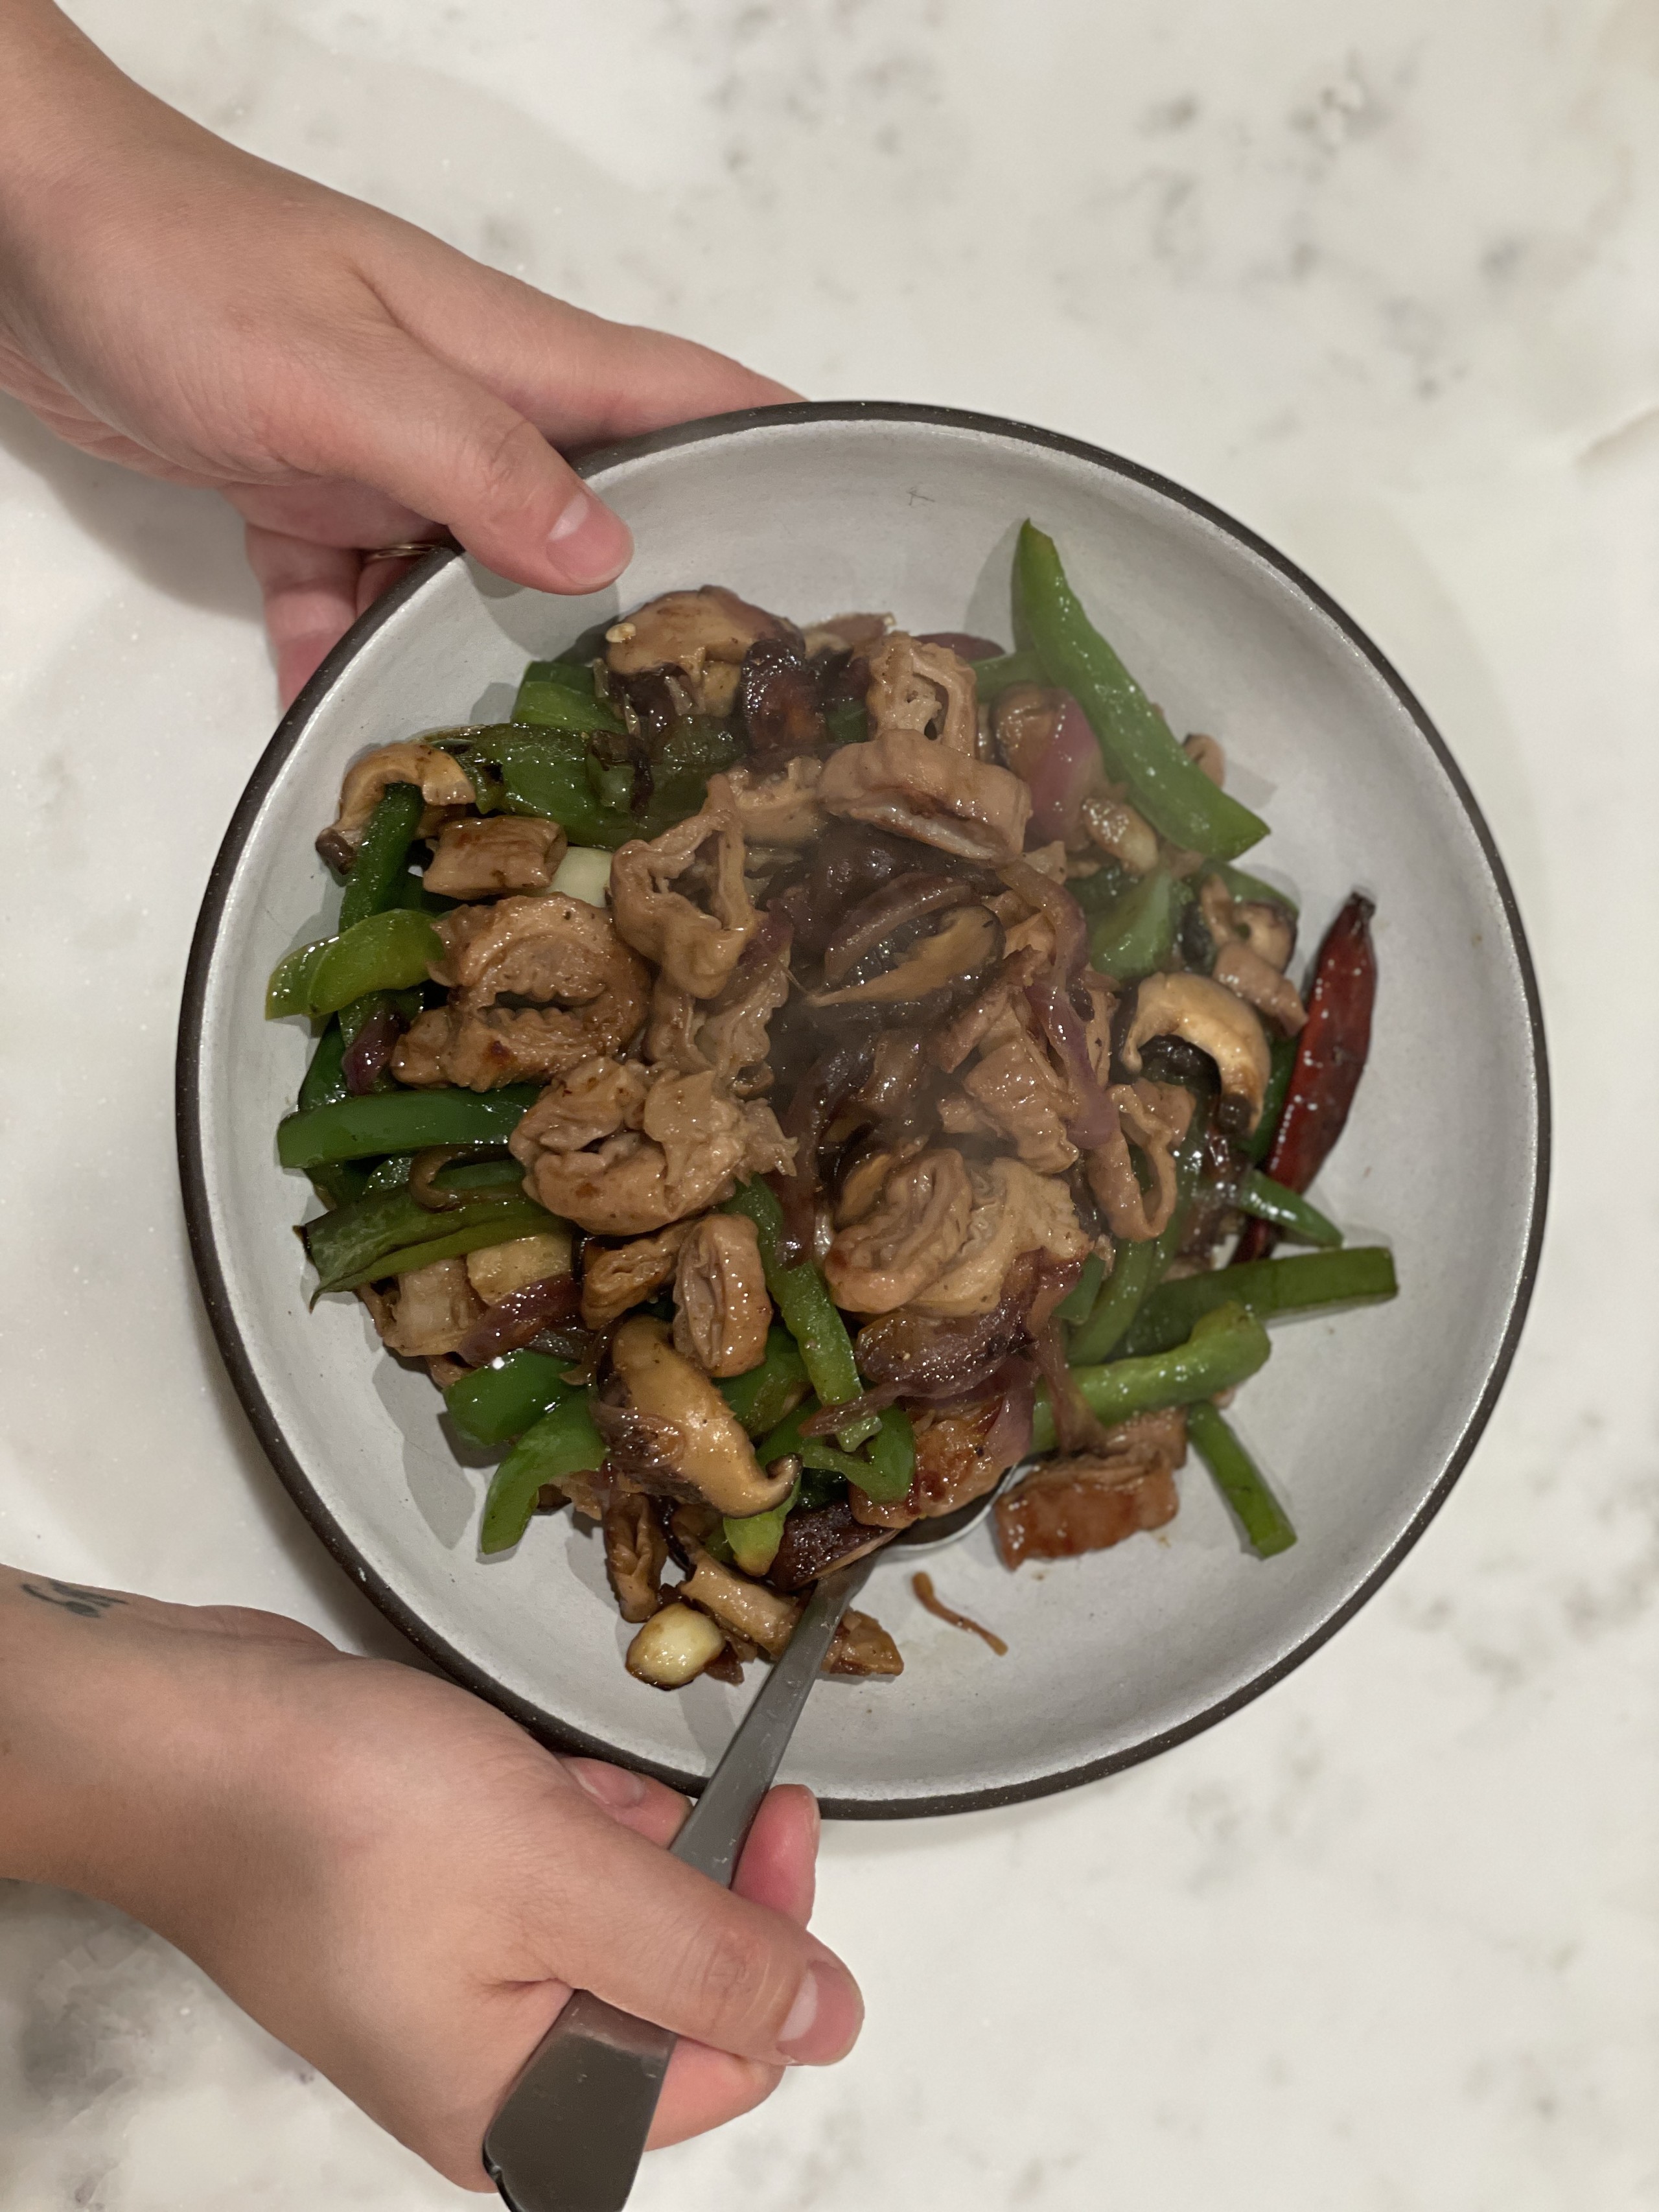 A photograph taken from above shows to light-skinned hands holding a stir-fry dish made up of a meat, green peppers, and other undistinguishable ingredients atop a white and grey marble table.